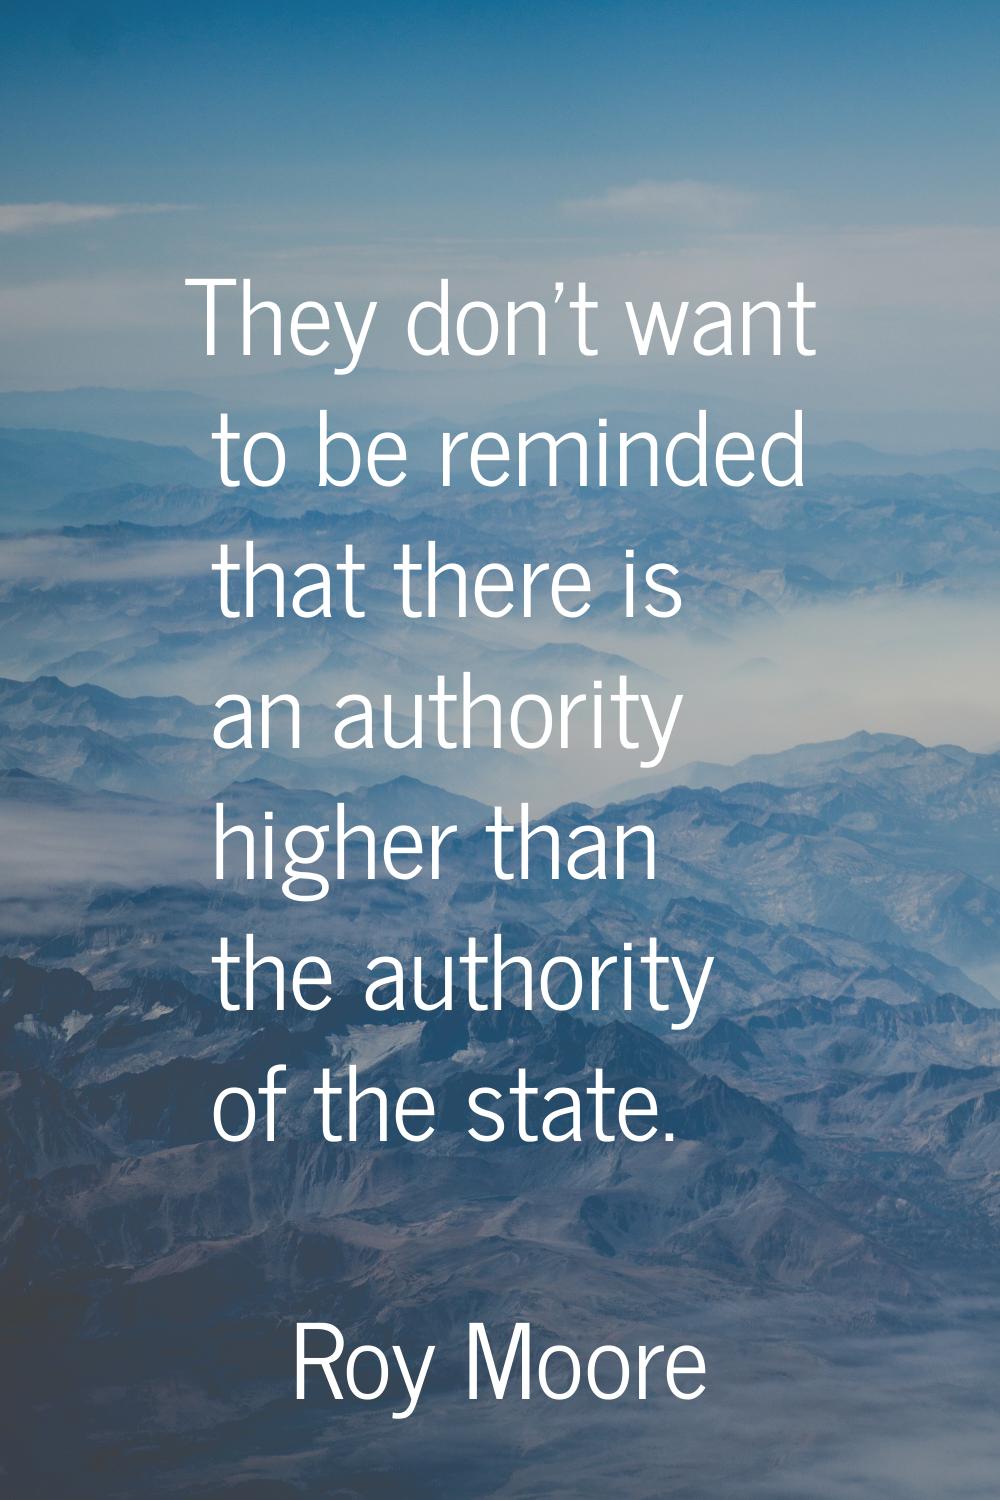 They don't want to be reminded that there is an authority higher than the authority of the state.